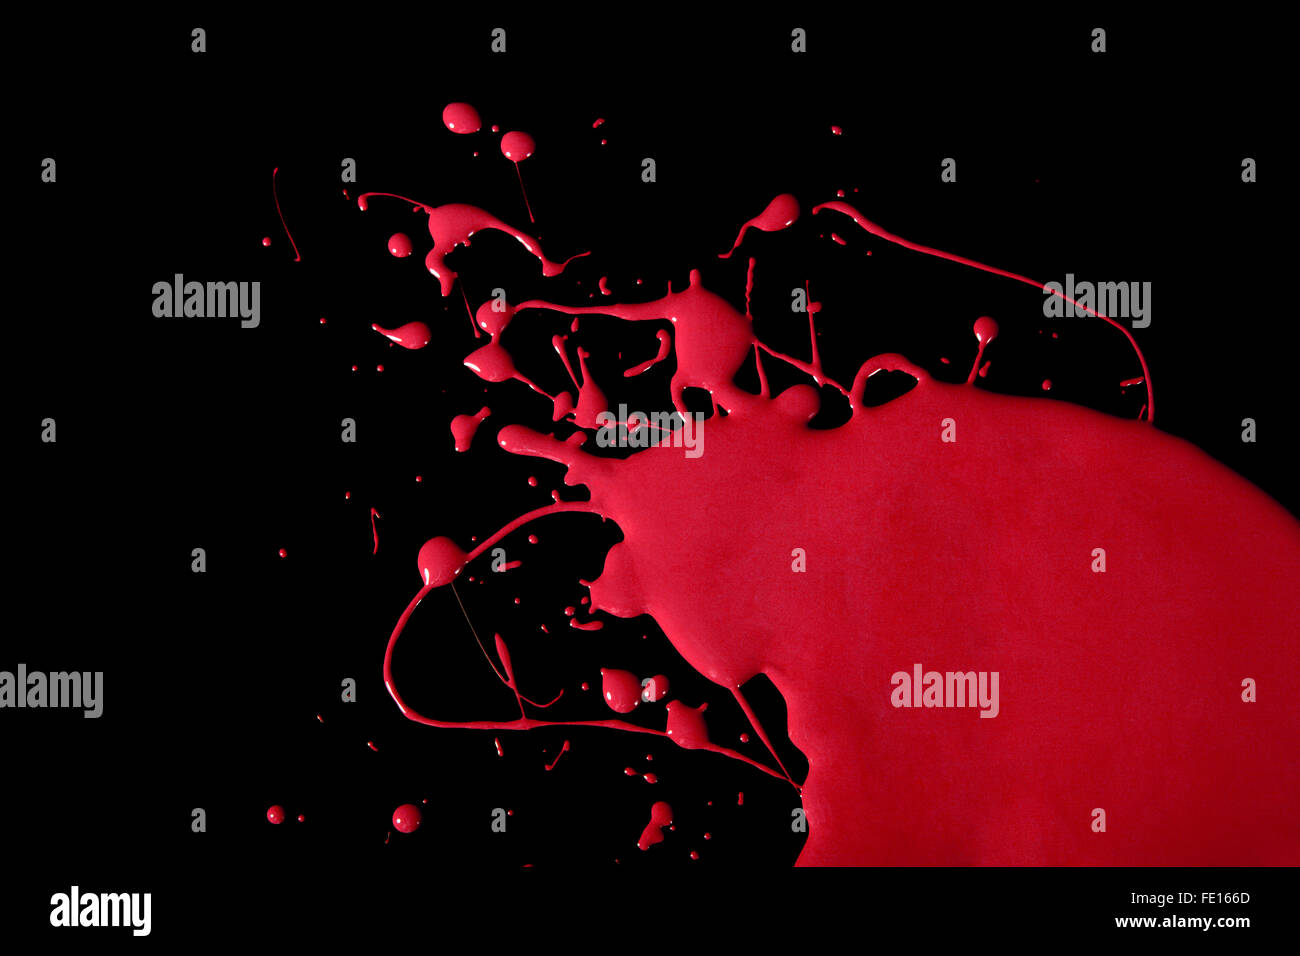 Splattered red paint on a black background Stock Photo